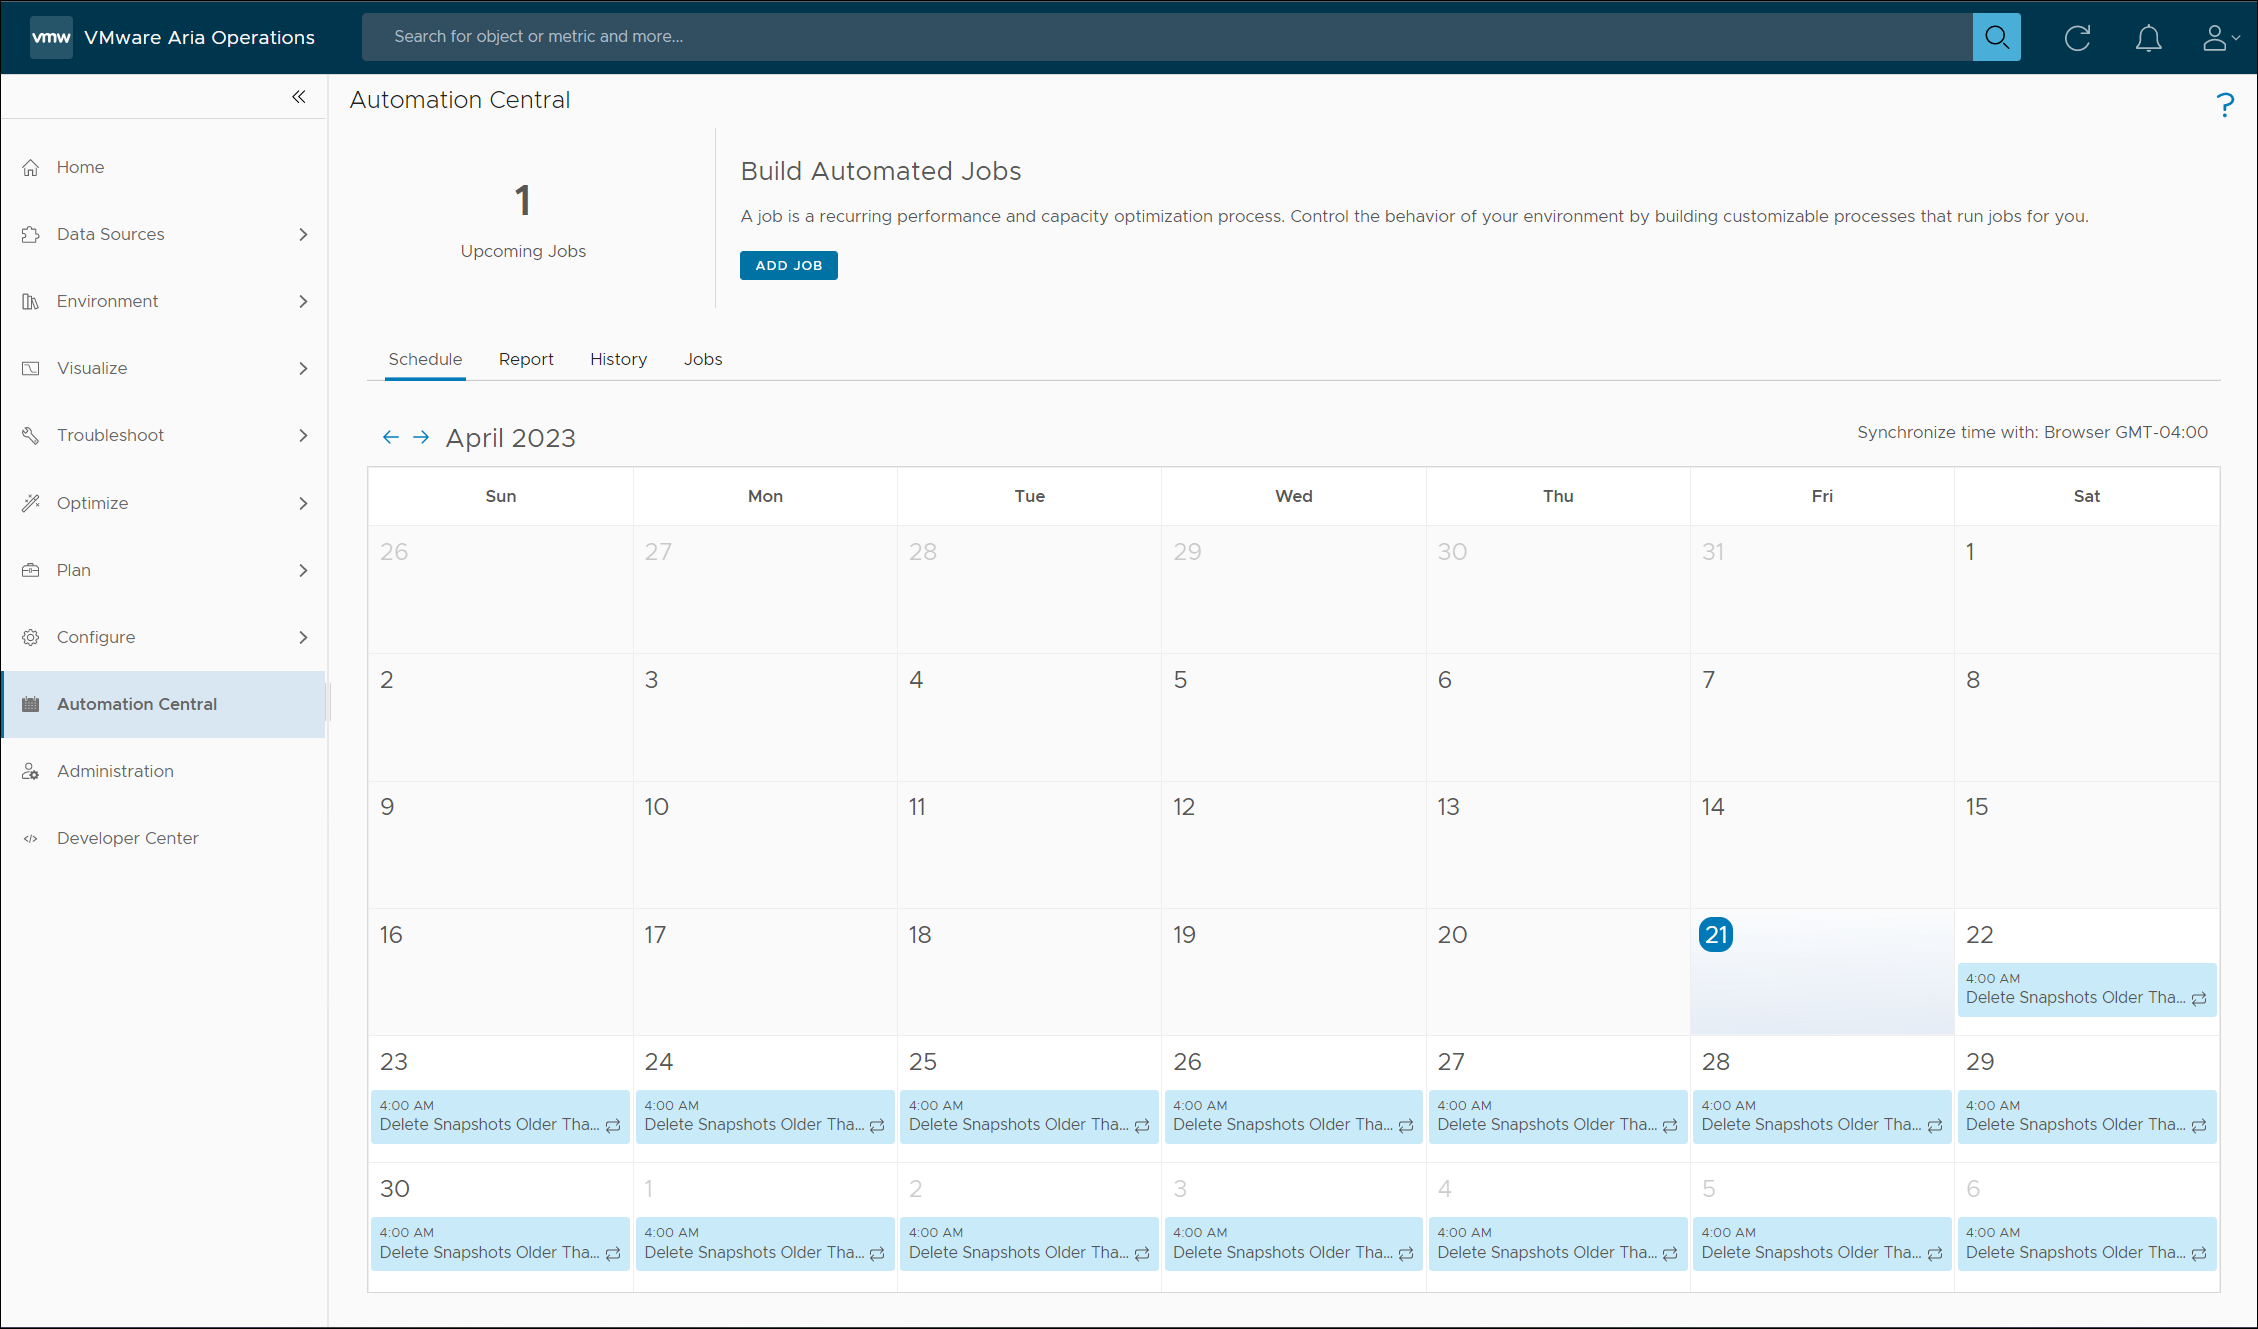 Screenshot of the VMware Aria Operations Automation Central Schedule View Showing the New Scheduled Job